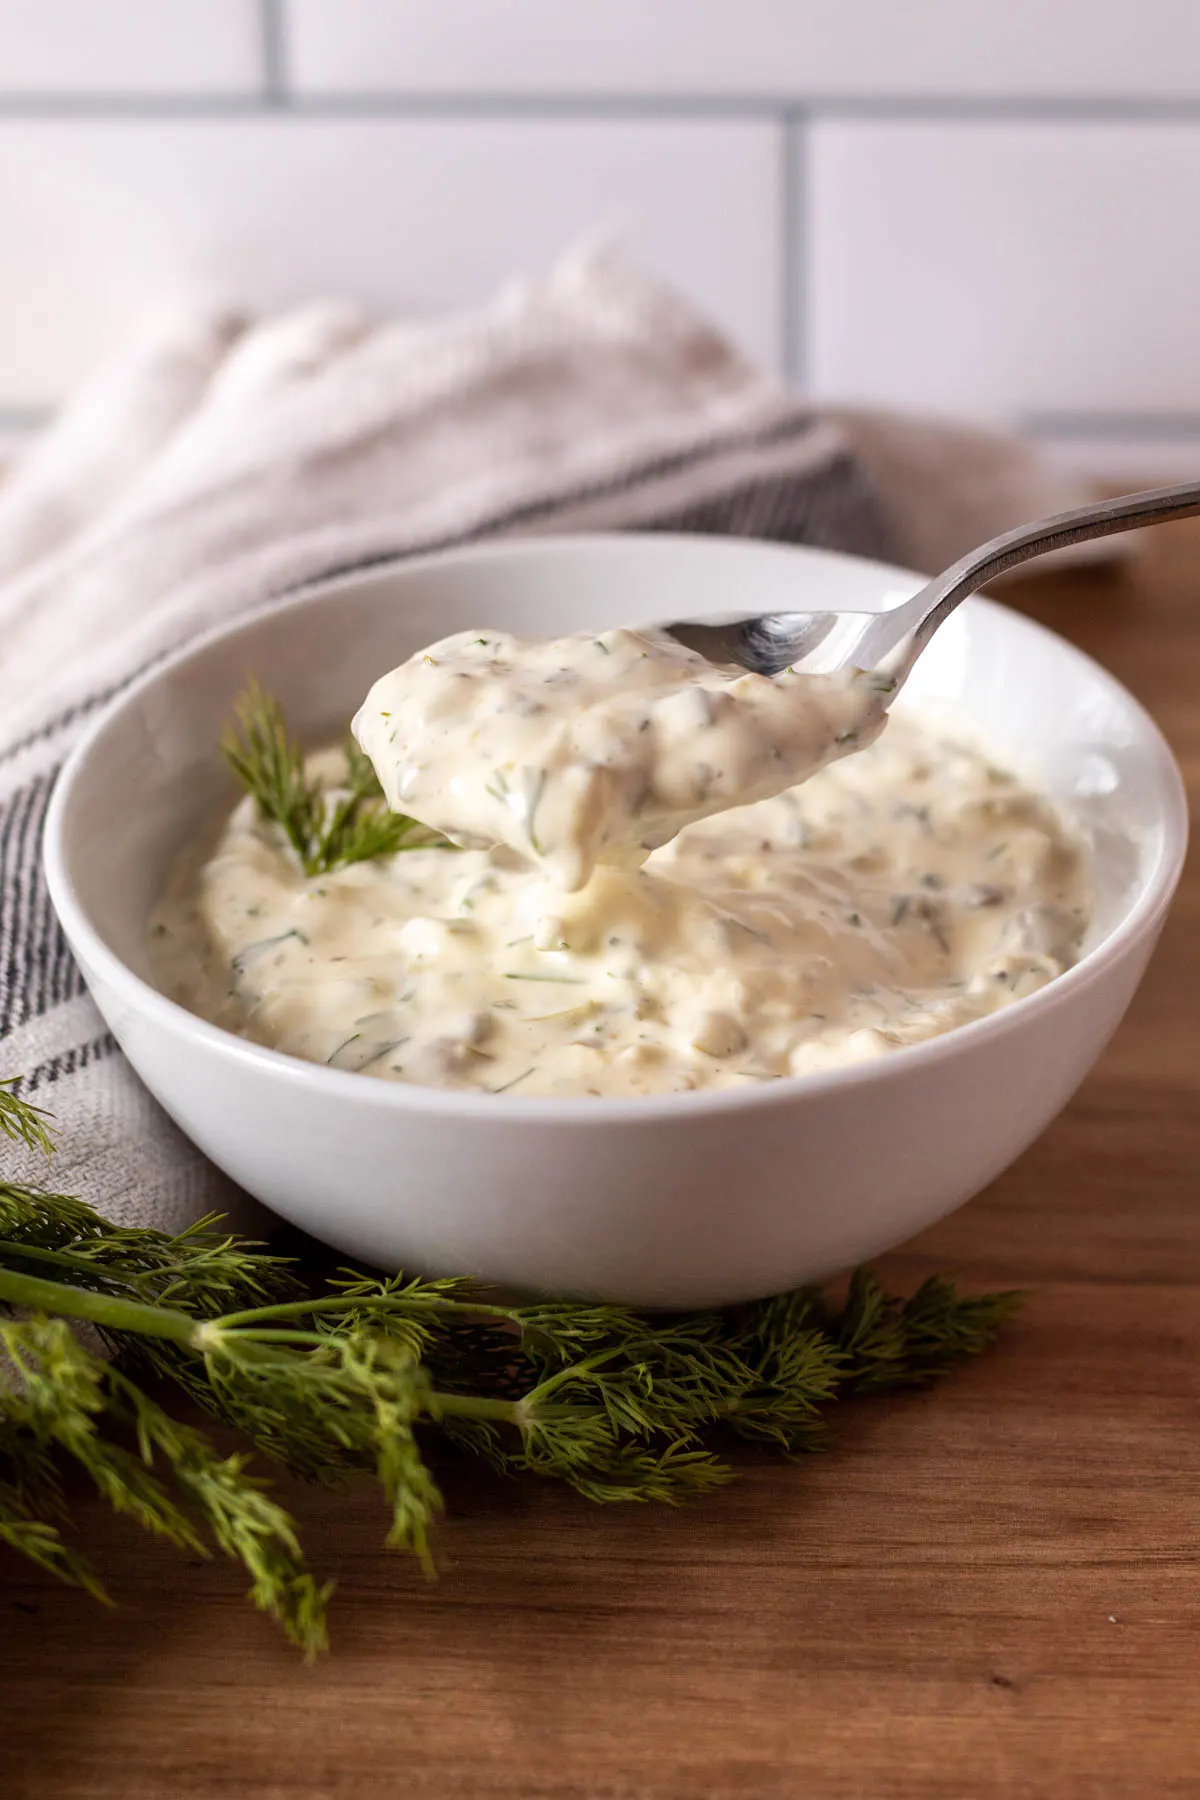 Homemade tartar sauce in white bowl, spoonful above bowl.